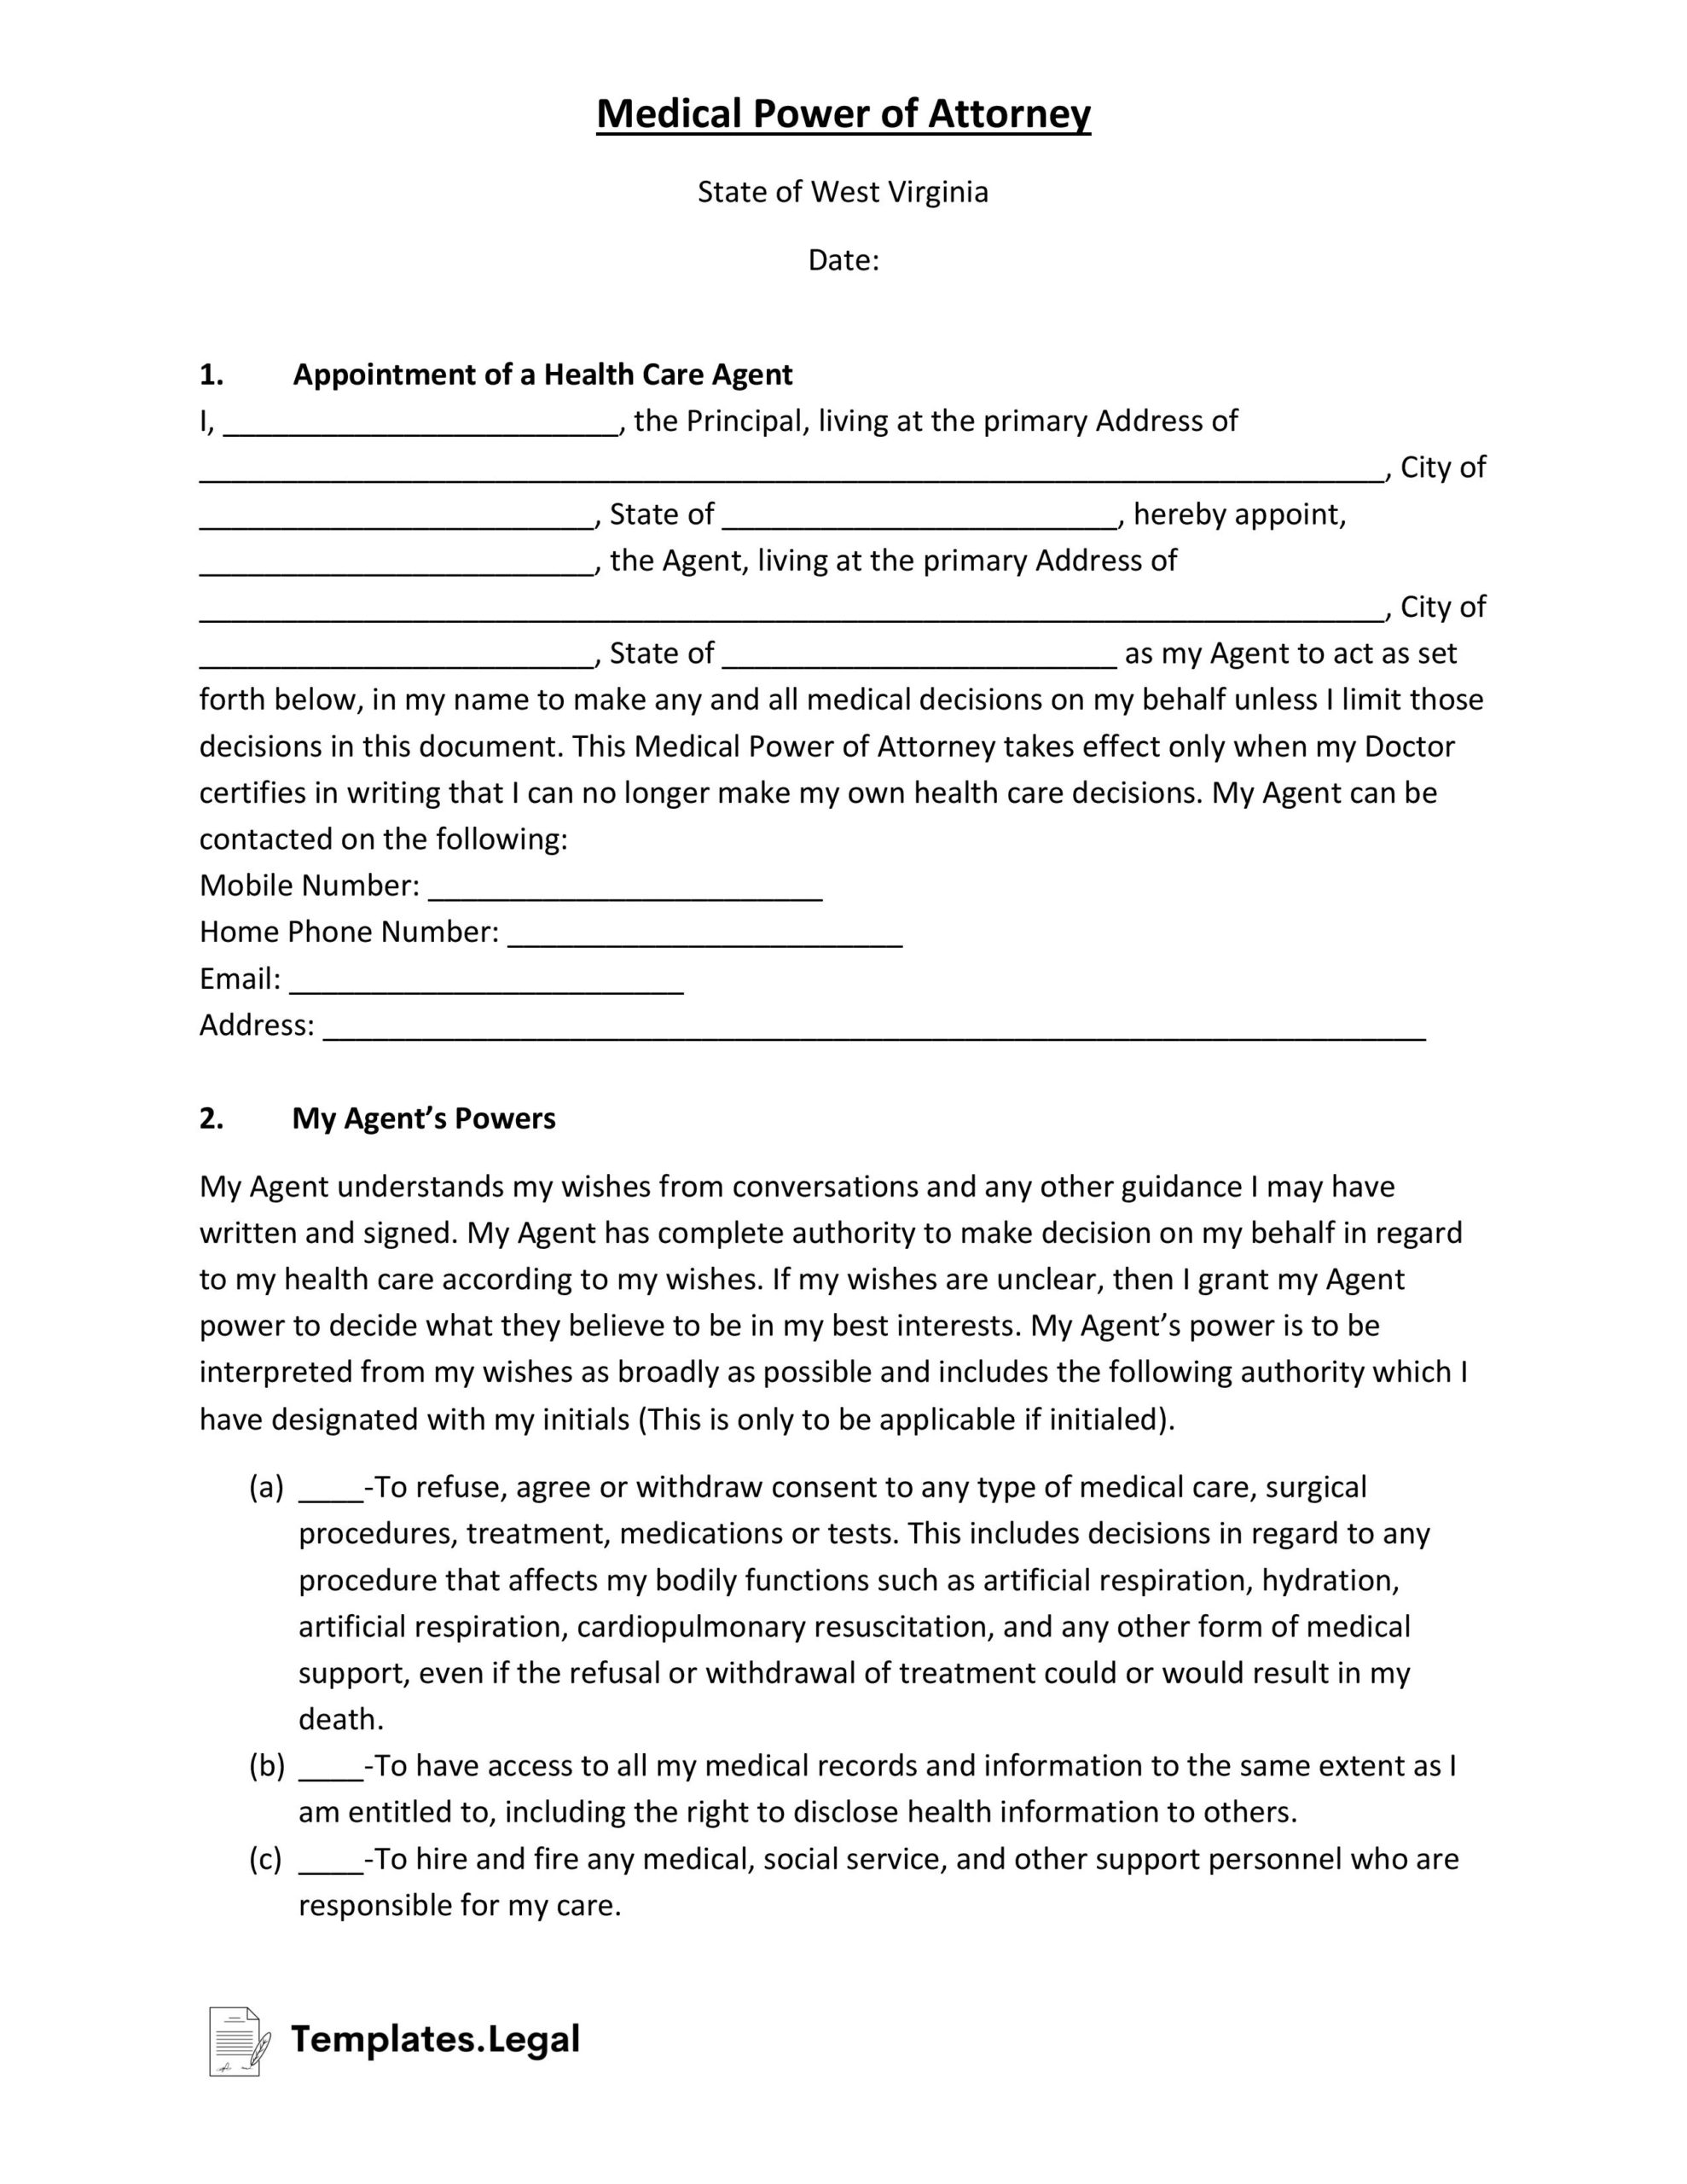 West Virginia Medical Power of Attorney- Templates.Legal